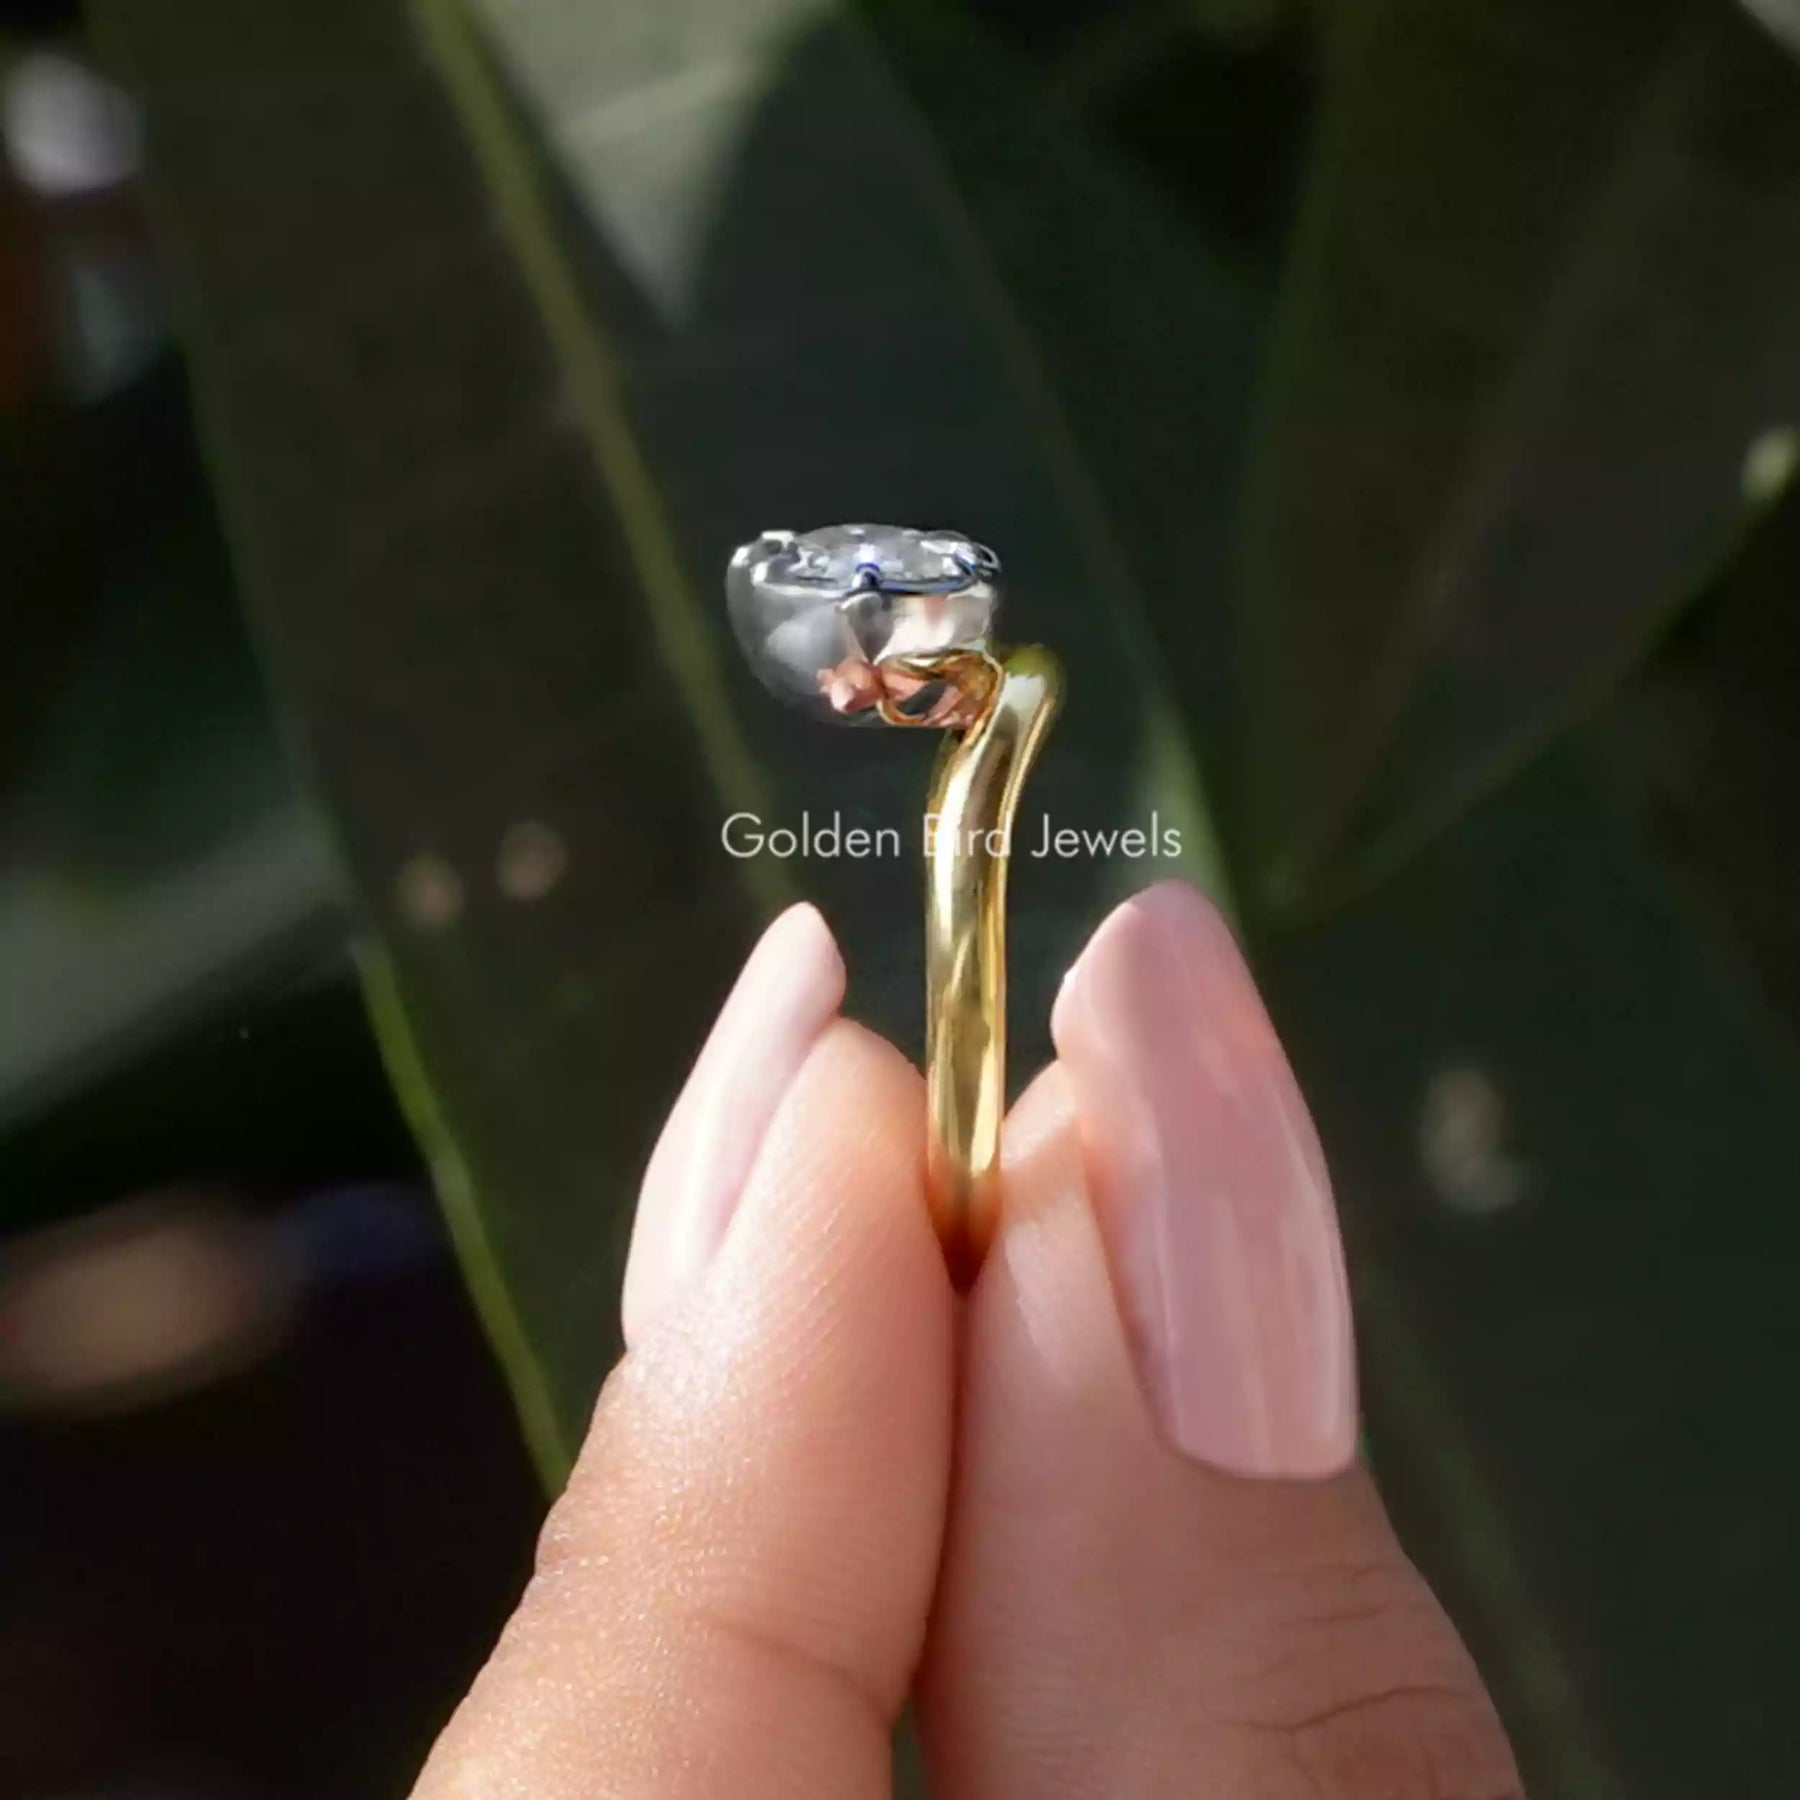 [Crushed Ice Oval Cut Moissanite Ring]-[Golden Bird Jewels]